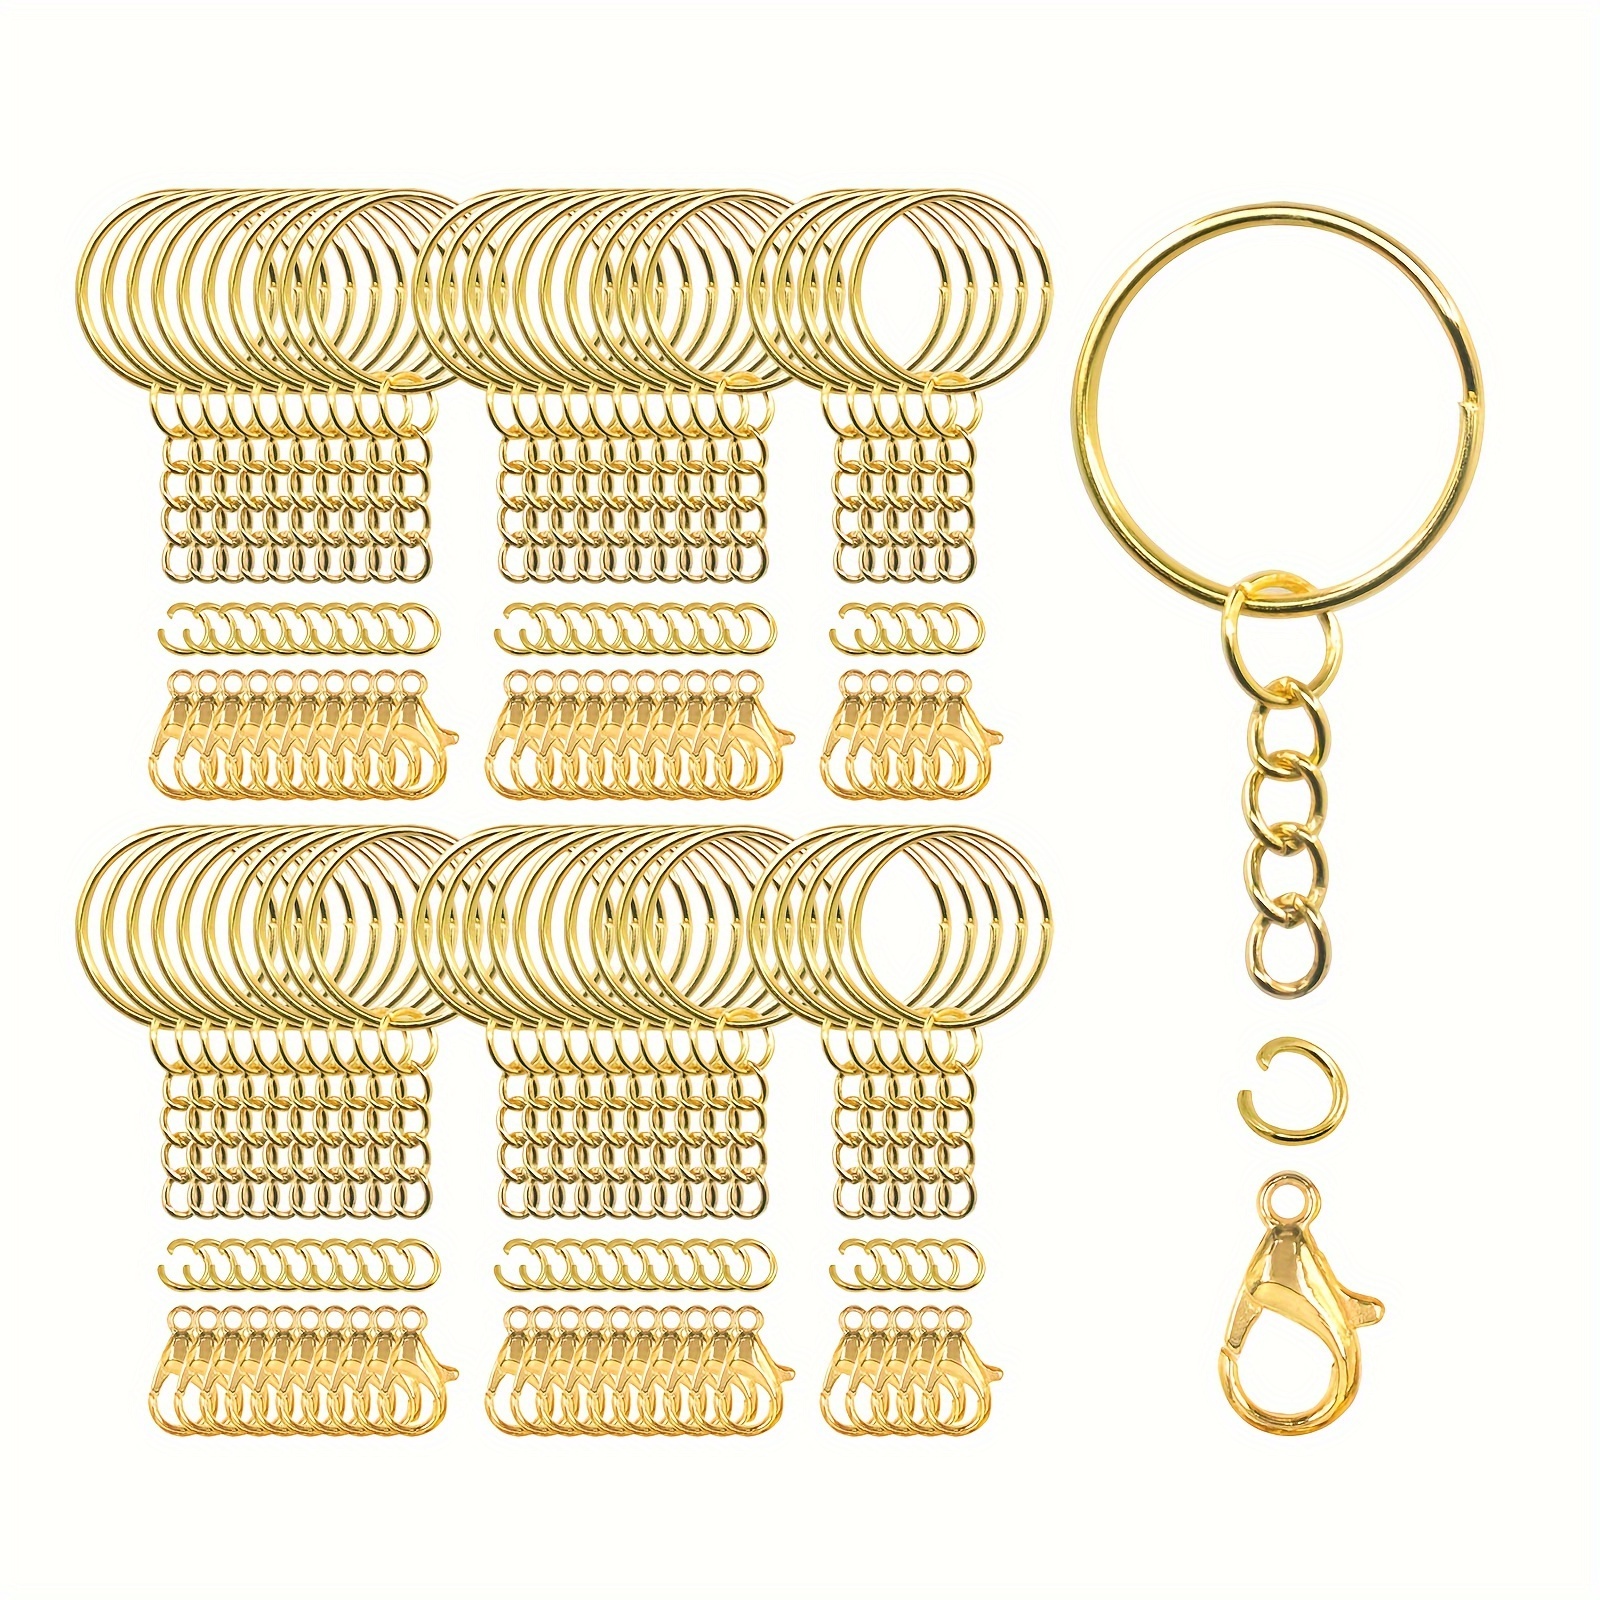 

60pcs Golden Silvery Key Rings Keychain Accessories With Little Lobster Clasps For Diy Crafts, Keychain Pendants Jewelry Making Supplies